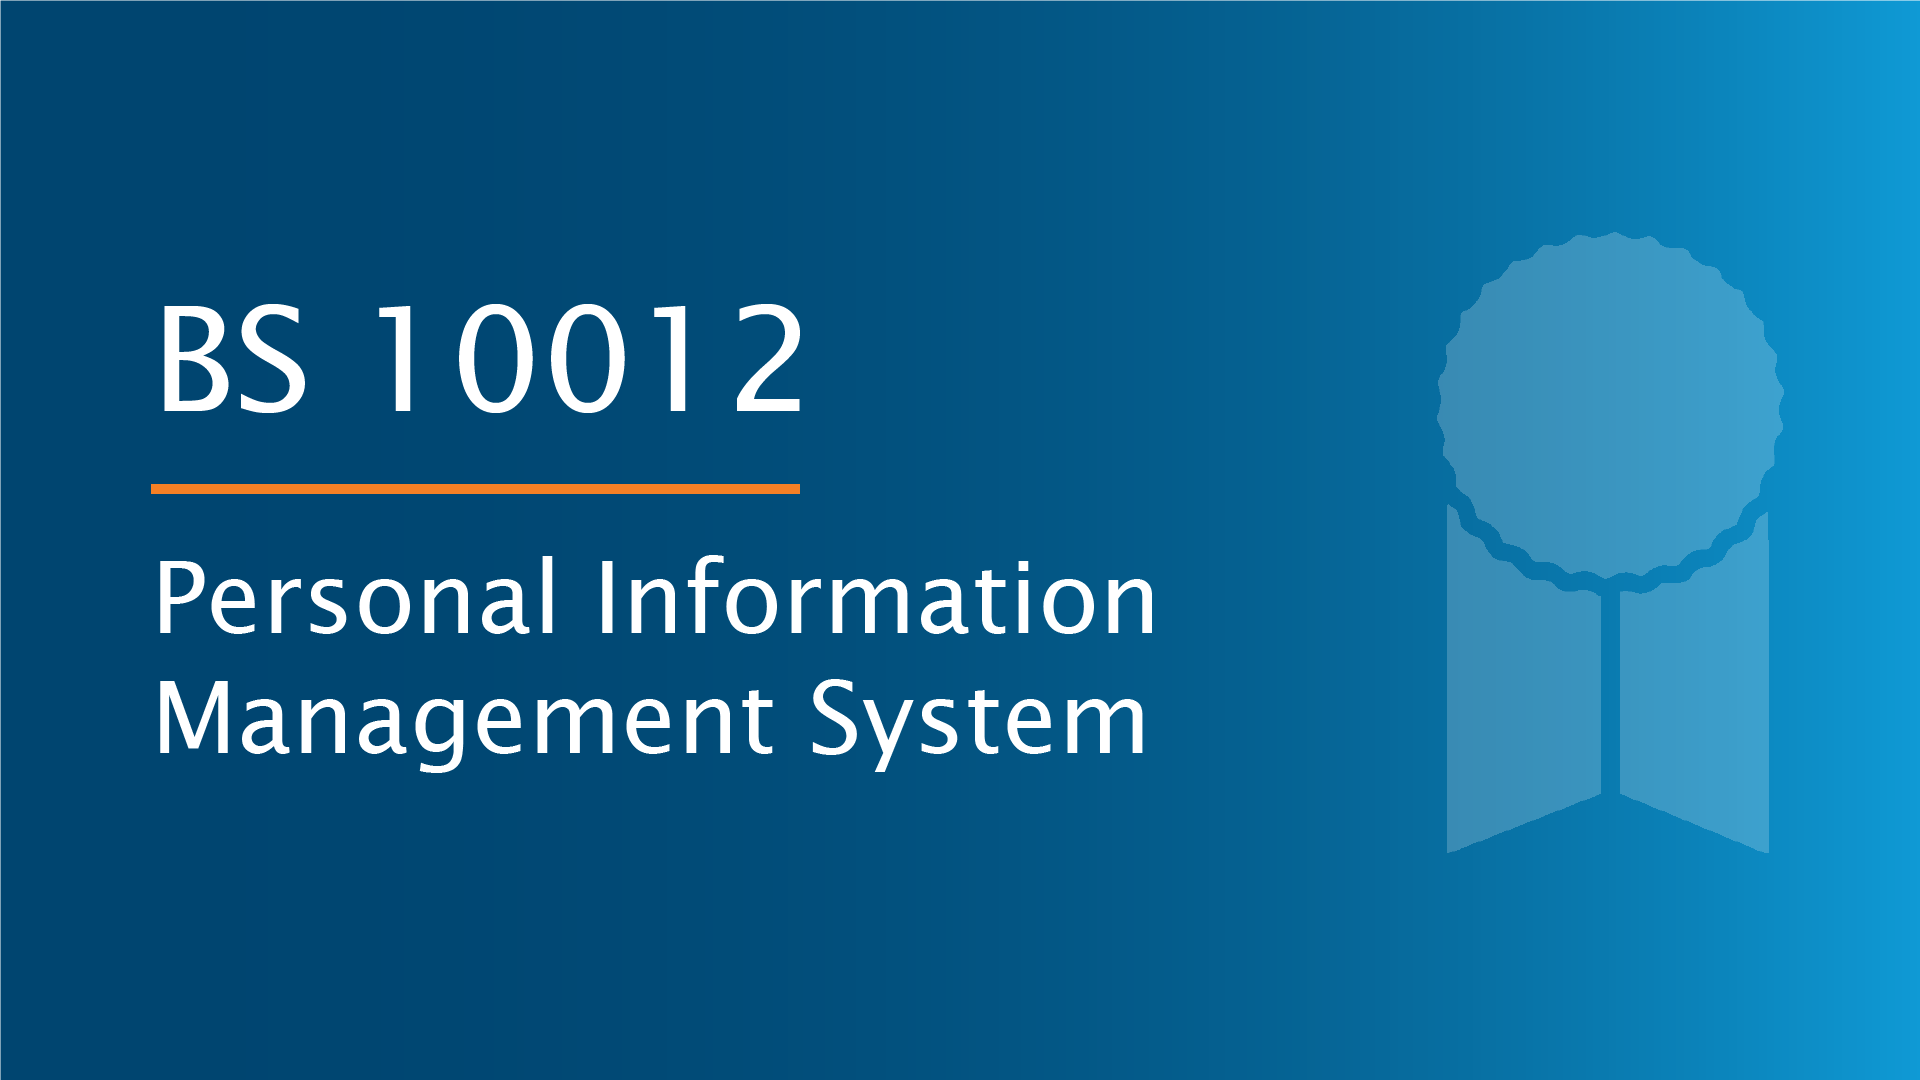 Personal Information Management System - BS 10012